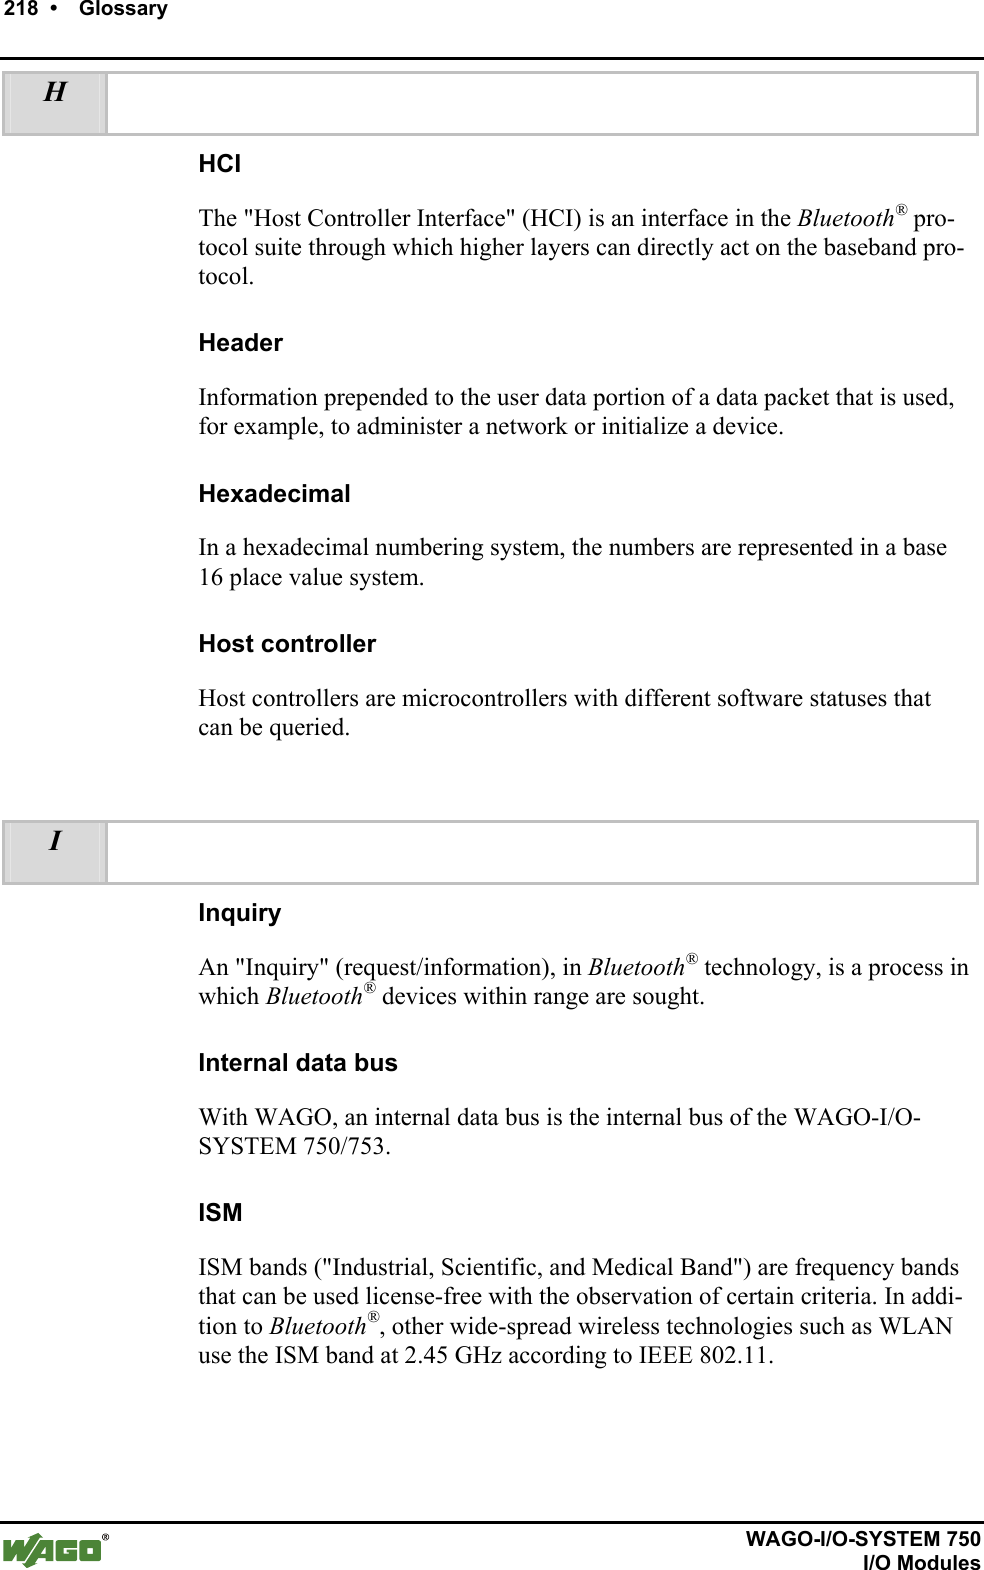 218  •    Glossary          WAGO-I/O-SYSTEM 750   I/O Modules H   HCI The &quot;Host Controller Interface&quot; (HCI) is an interface in the Bluetooth® pro-tocol suite through which higher layers can directly act on the baseband pro-tocol. Header Information prepended to the user data portion of a data packet that is used, for example, to administer a network or initialize a device. Hexadecimal In a hexadecimal numbering system, the numbers are represented in a base 16 place value system. Host controller Host controllers are microcontrollers with different software statuses that can be queried.  I   Inquiry An &quot;Inquiry&quot; (request/information), in Bluetooth® technology, is a process in which Bluetooth® devices within range are sought.  Internal data bus With WAGO, an internal data bus is the internal bus of the WAGO-I/O-SYSTEM 750/753. ISM ISM bands (&quot;Industrial, Scientific, and Medical Band&quot;) are frequency bands that can be used license-free with the observation of certain criteria. In addi-tion to Bluetooth®, other wide-spread wireless technologies such as WLAN use the ISM band at 2.45 GHz according to IEEE 802.11.  